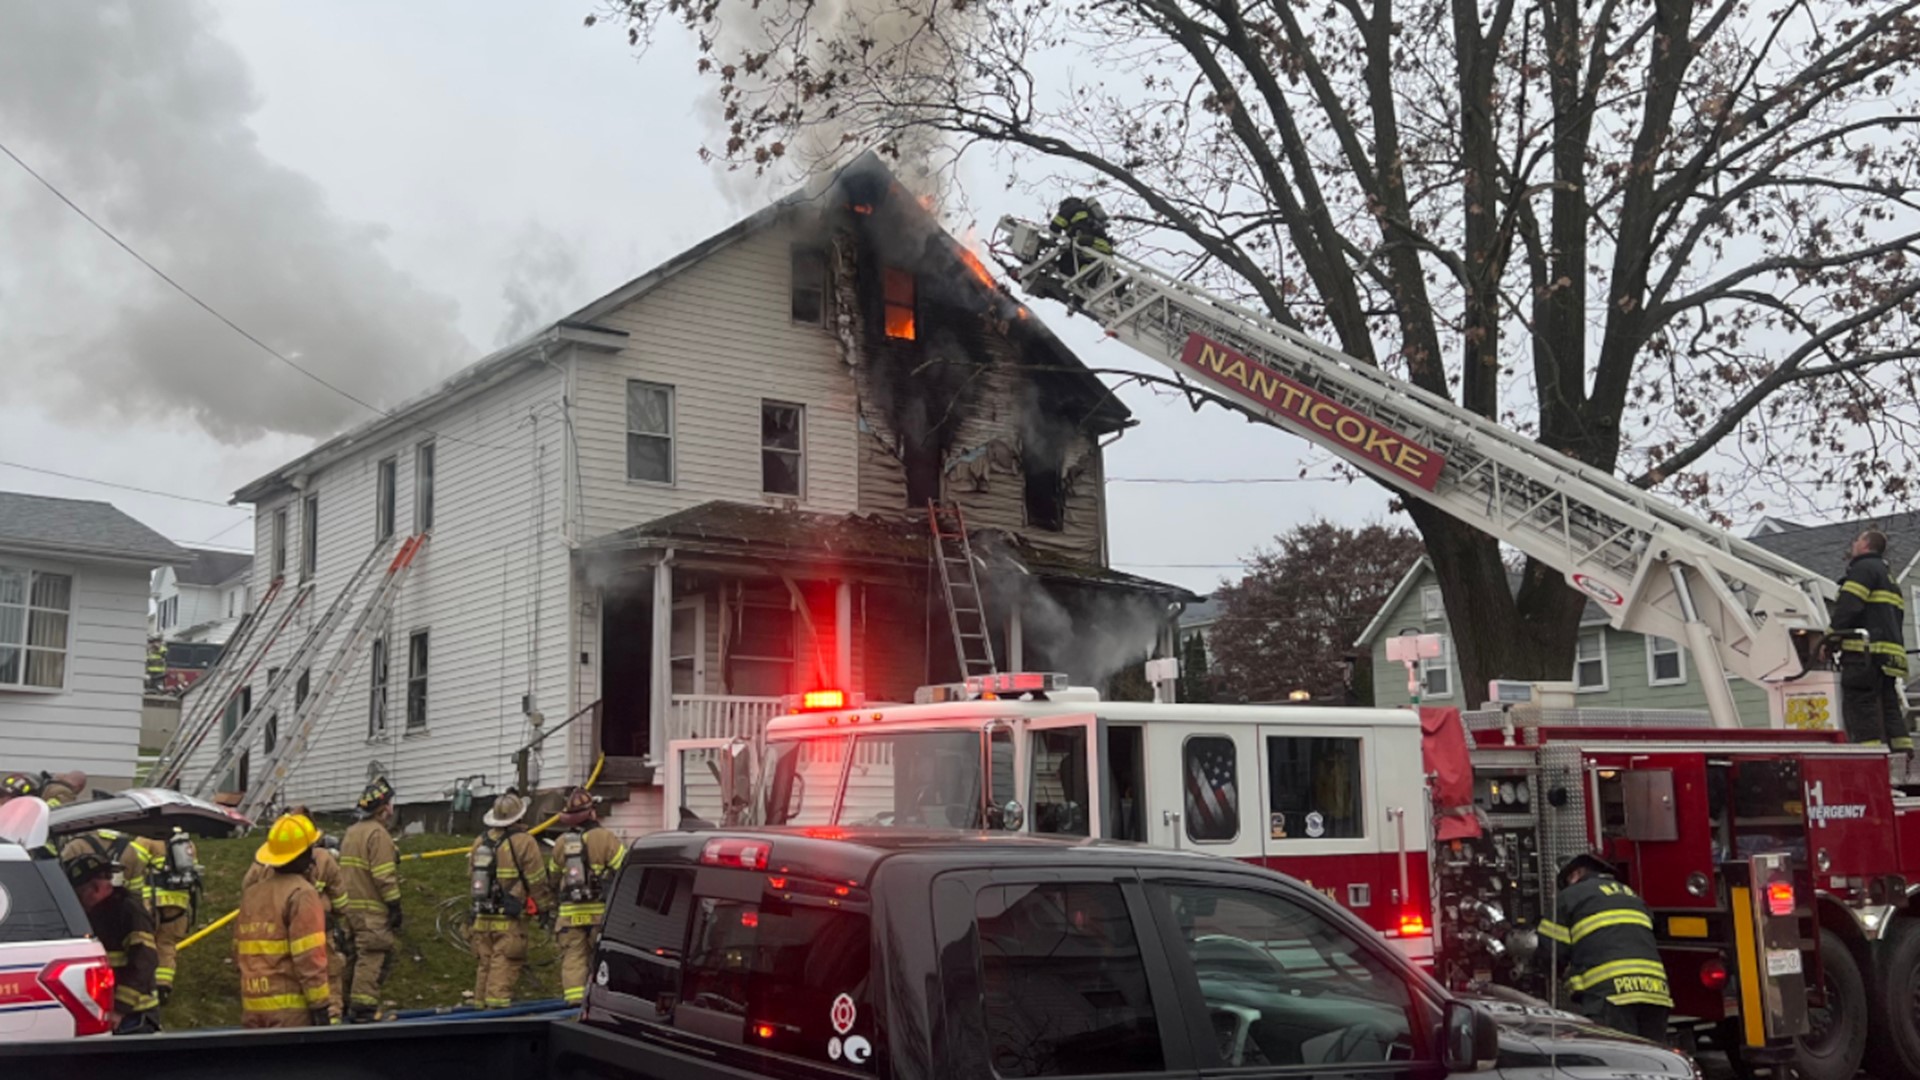 One firefighter suffered some burns in the fire in Nanticoke.